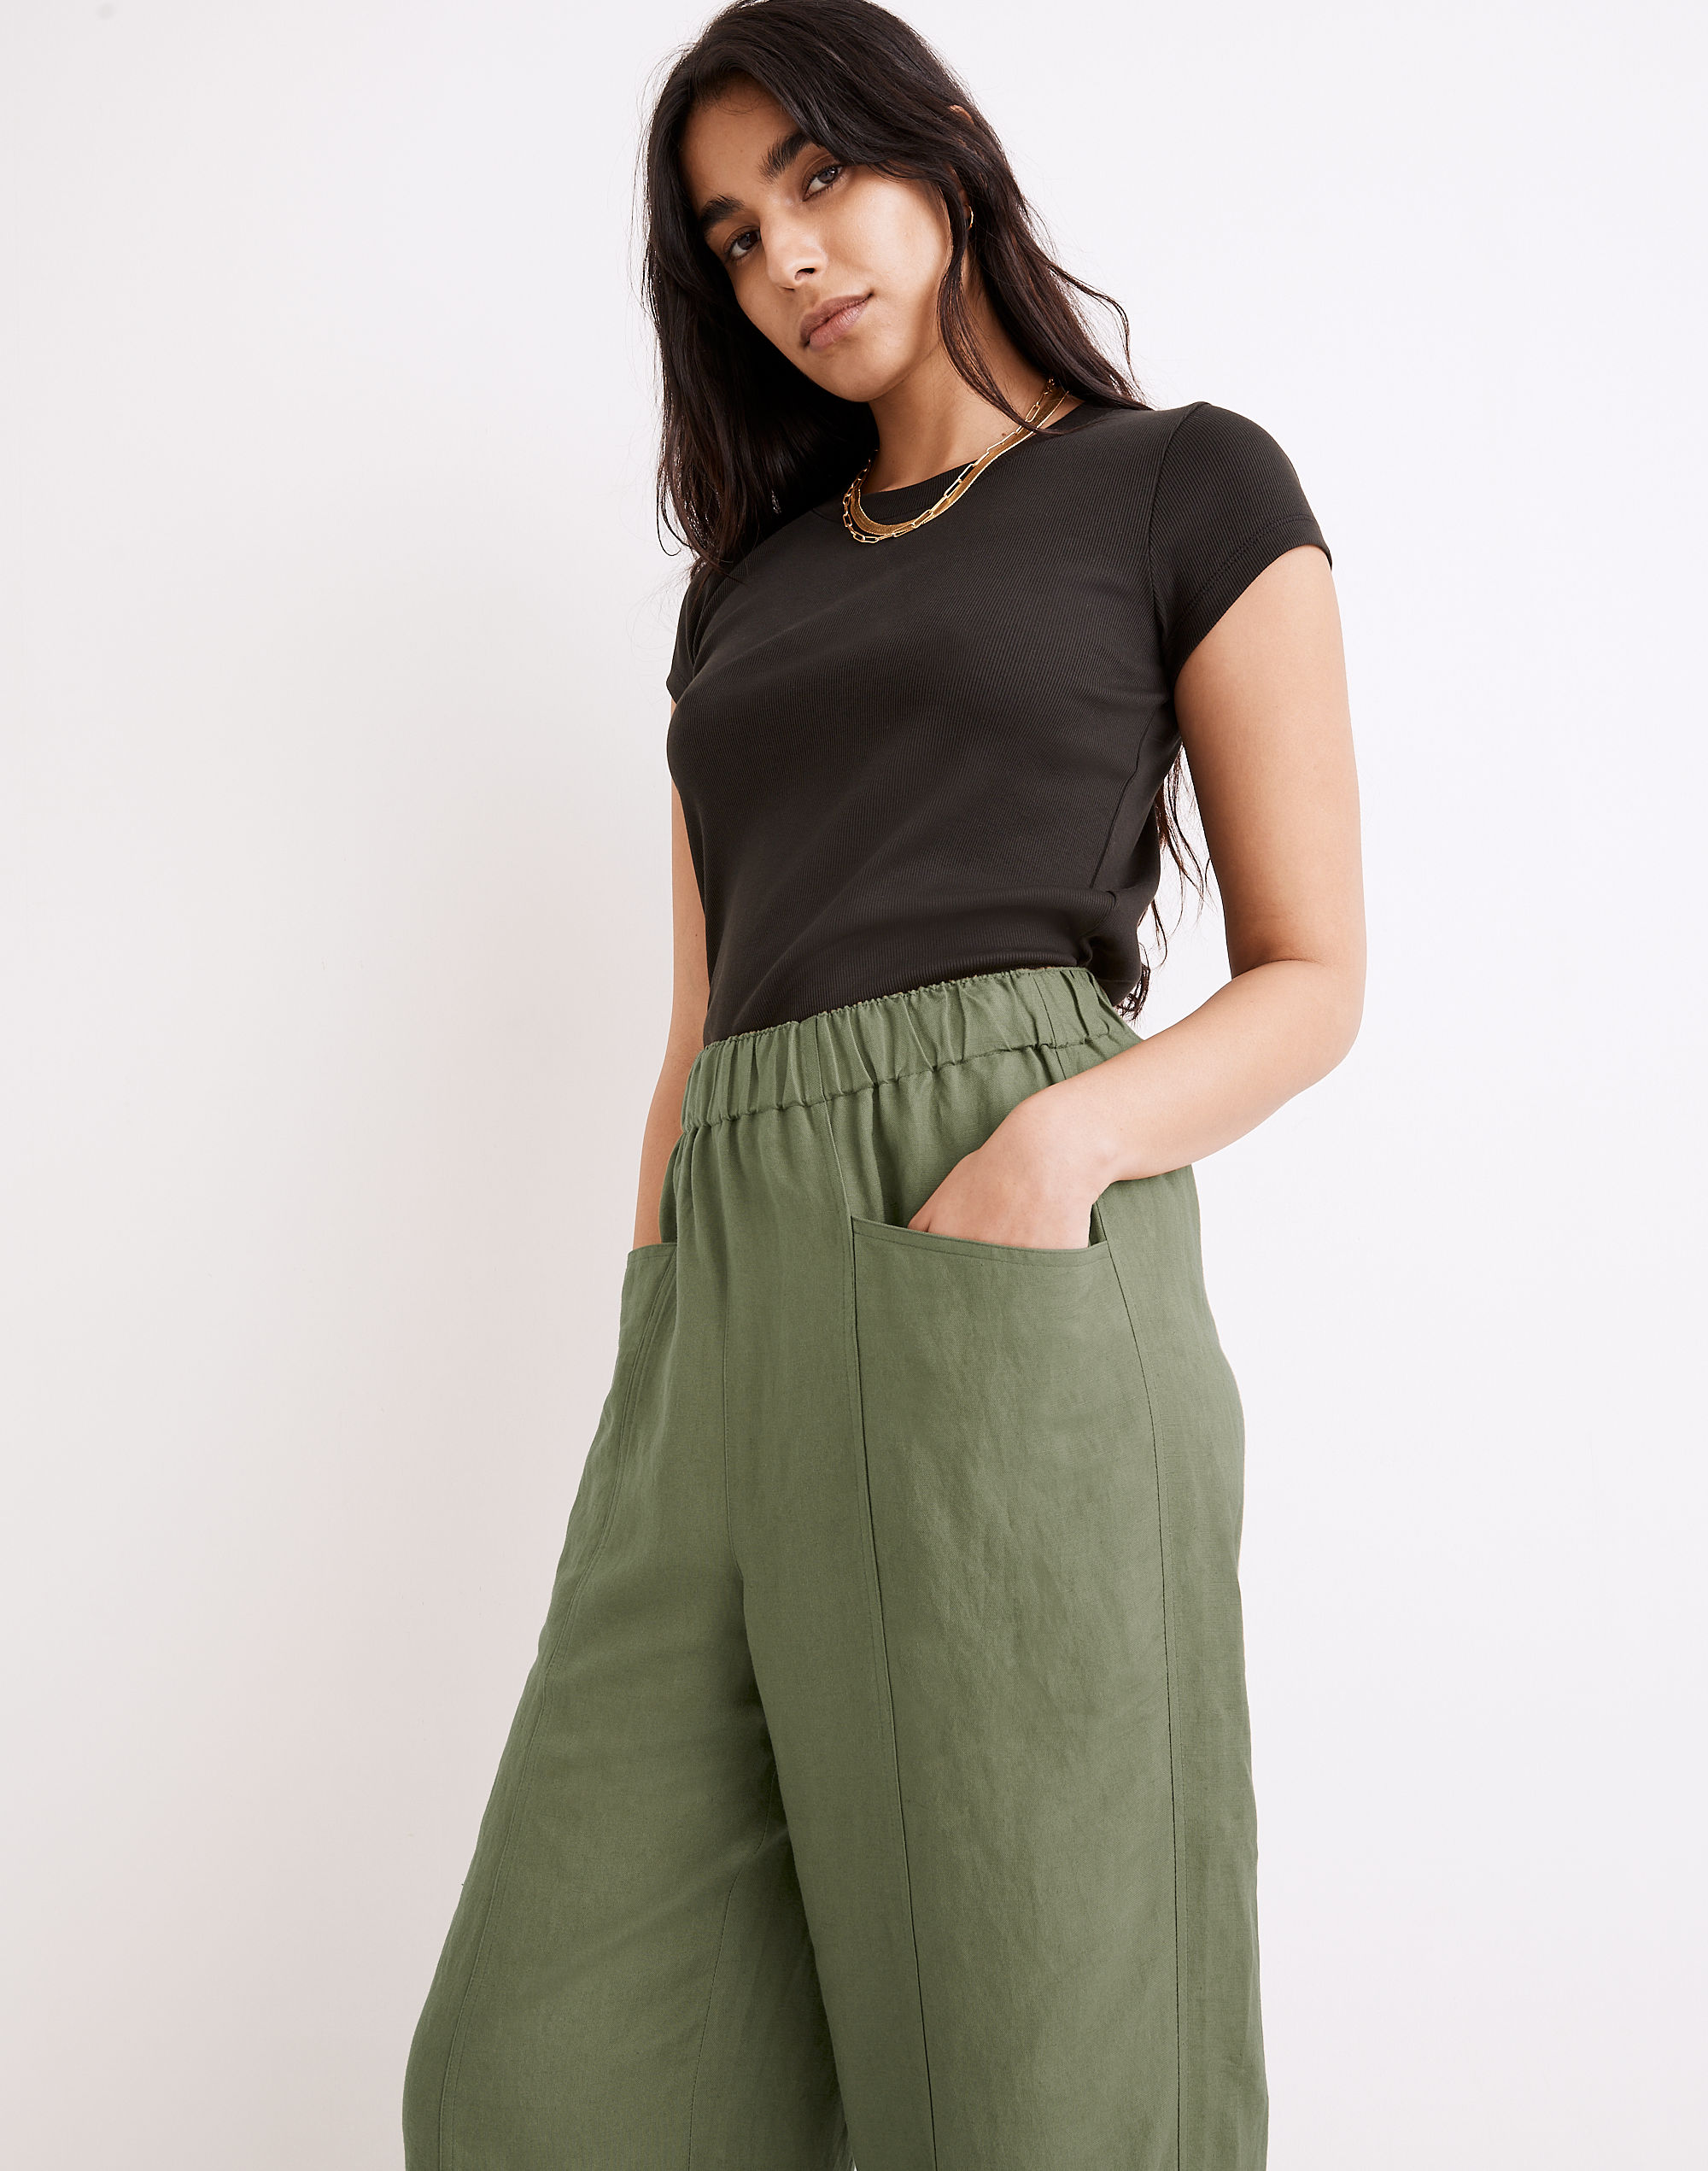 Madewell Cute Black Womens Linen Pants Size M - $49 - From Geena